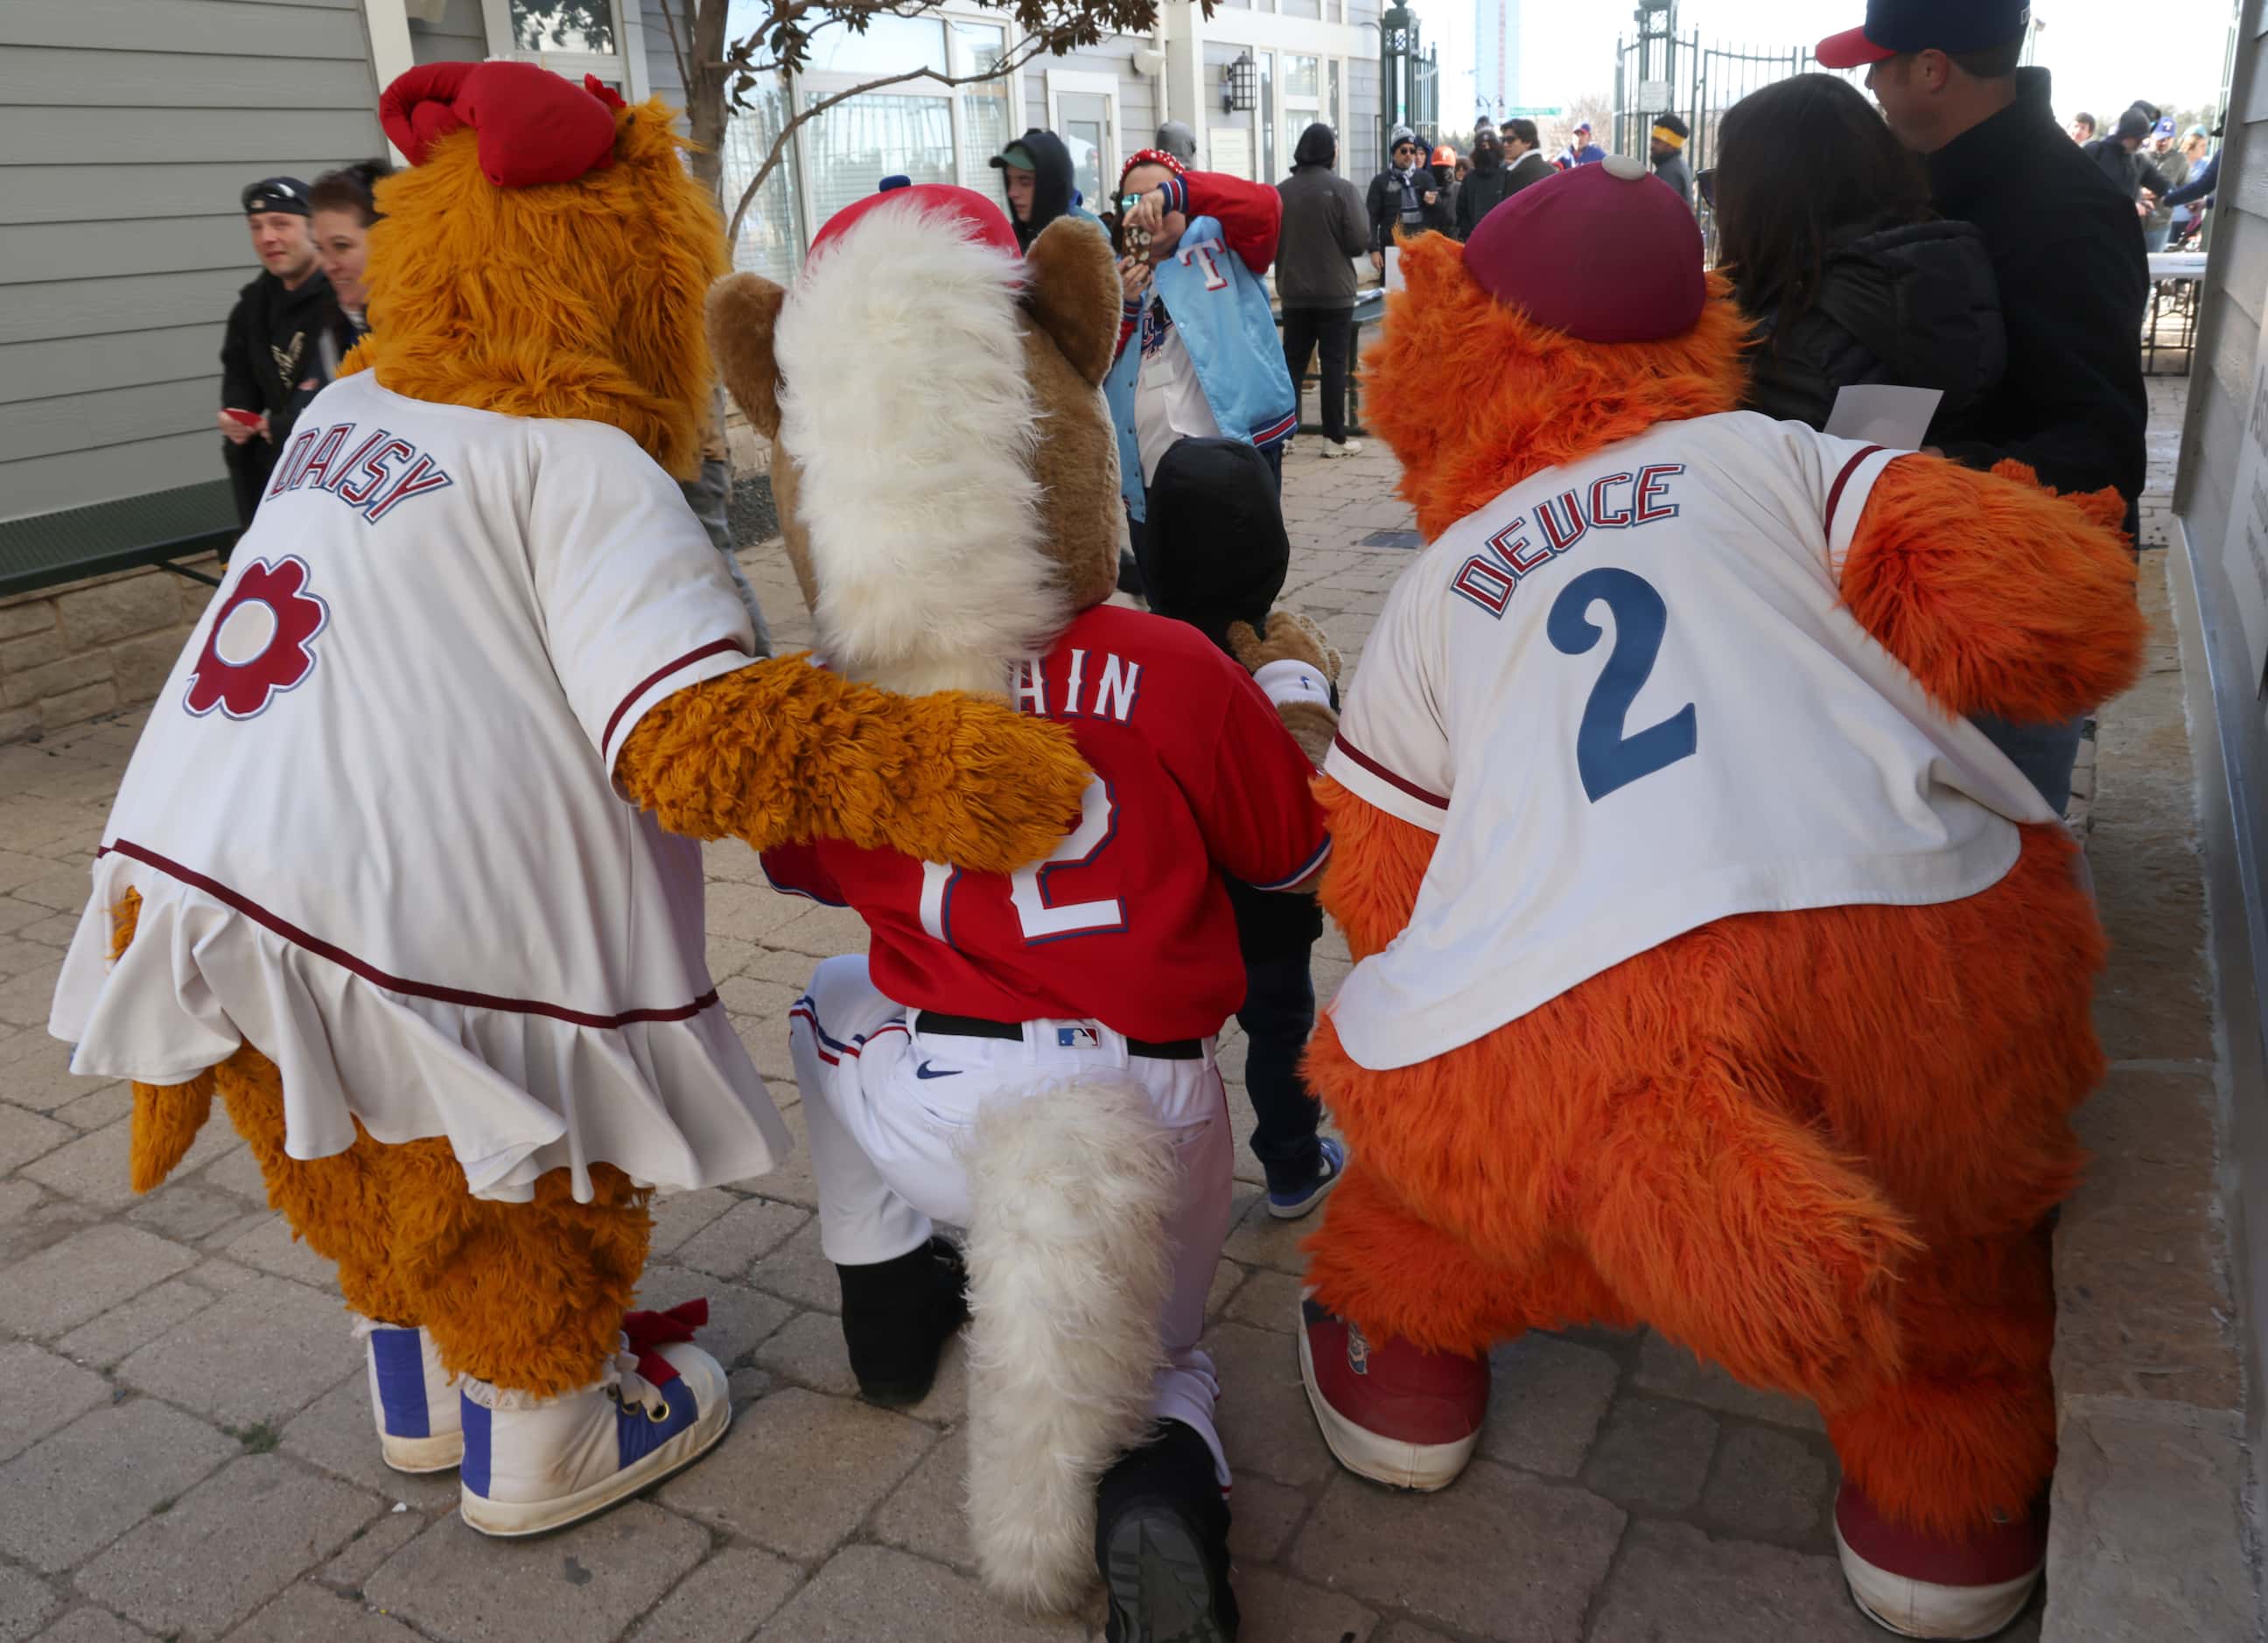 Team mascots representing the Texas Rangers and Frisco RoughRiders baseball teams pose with...